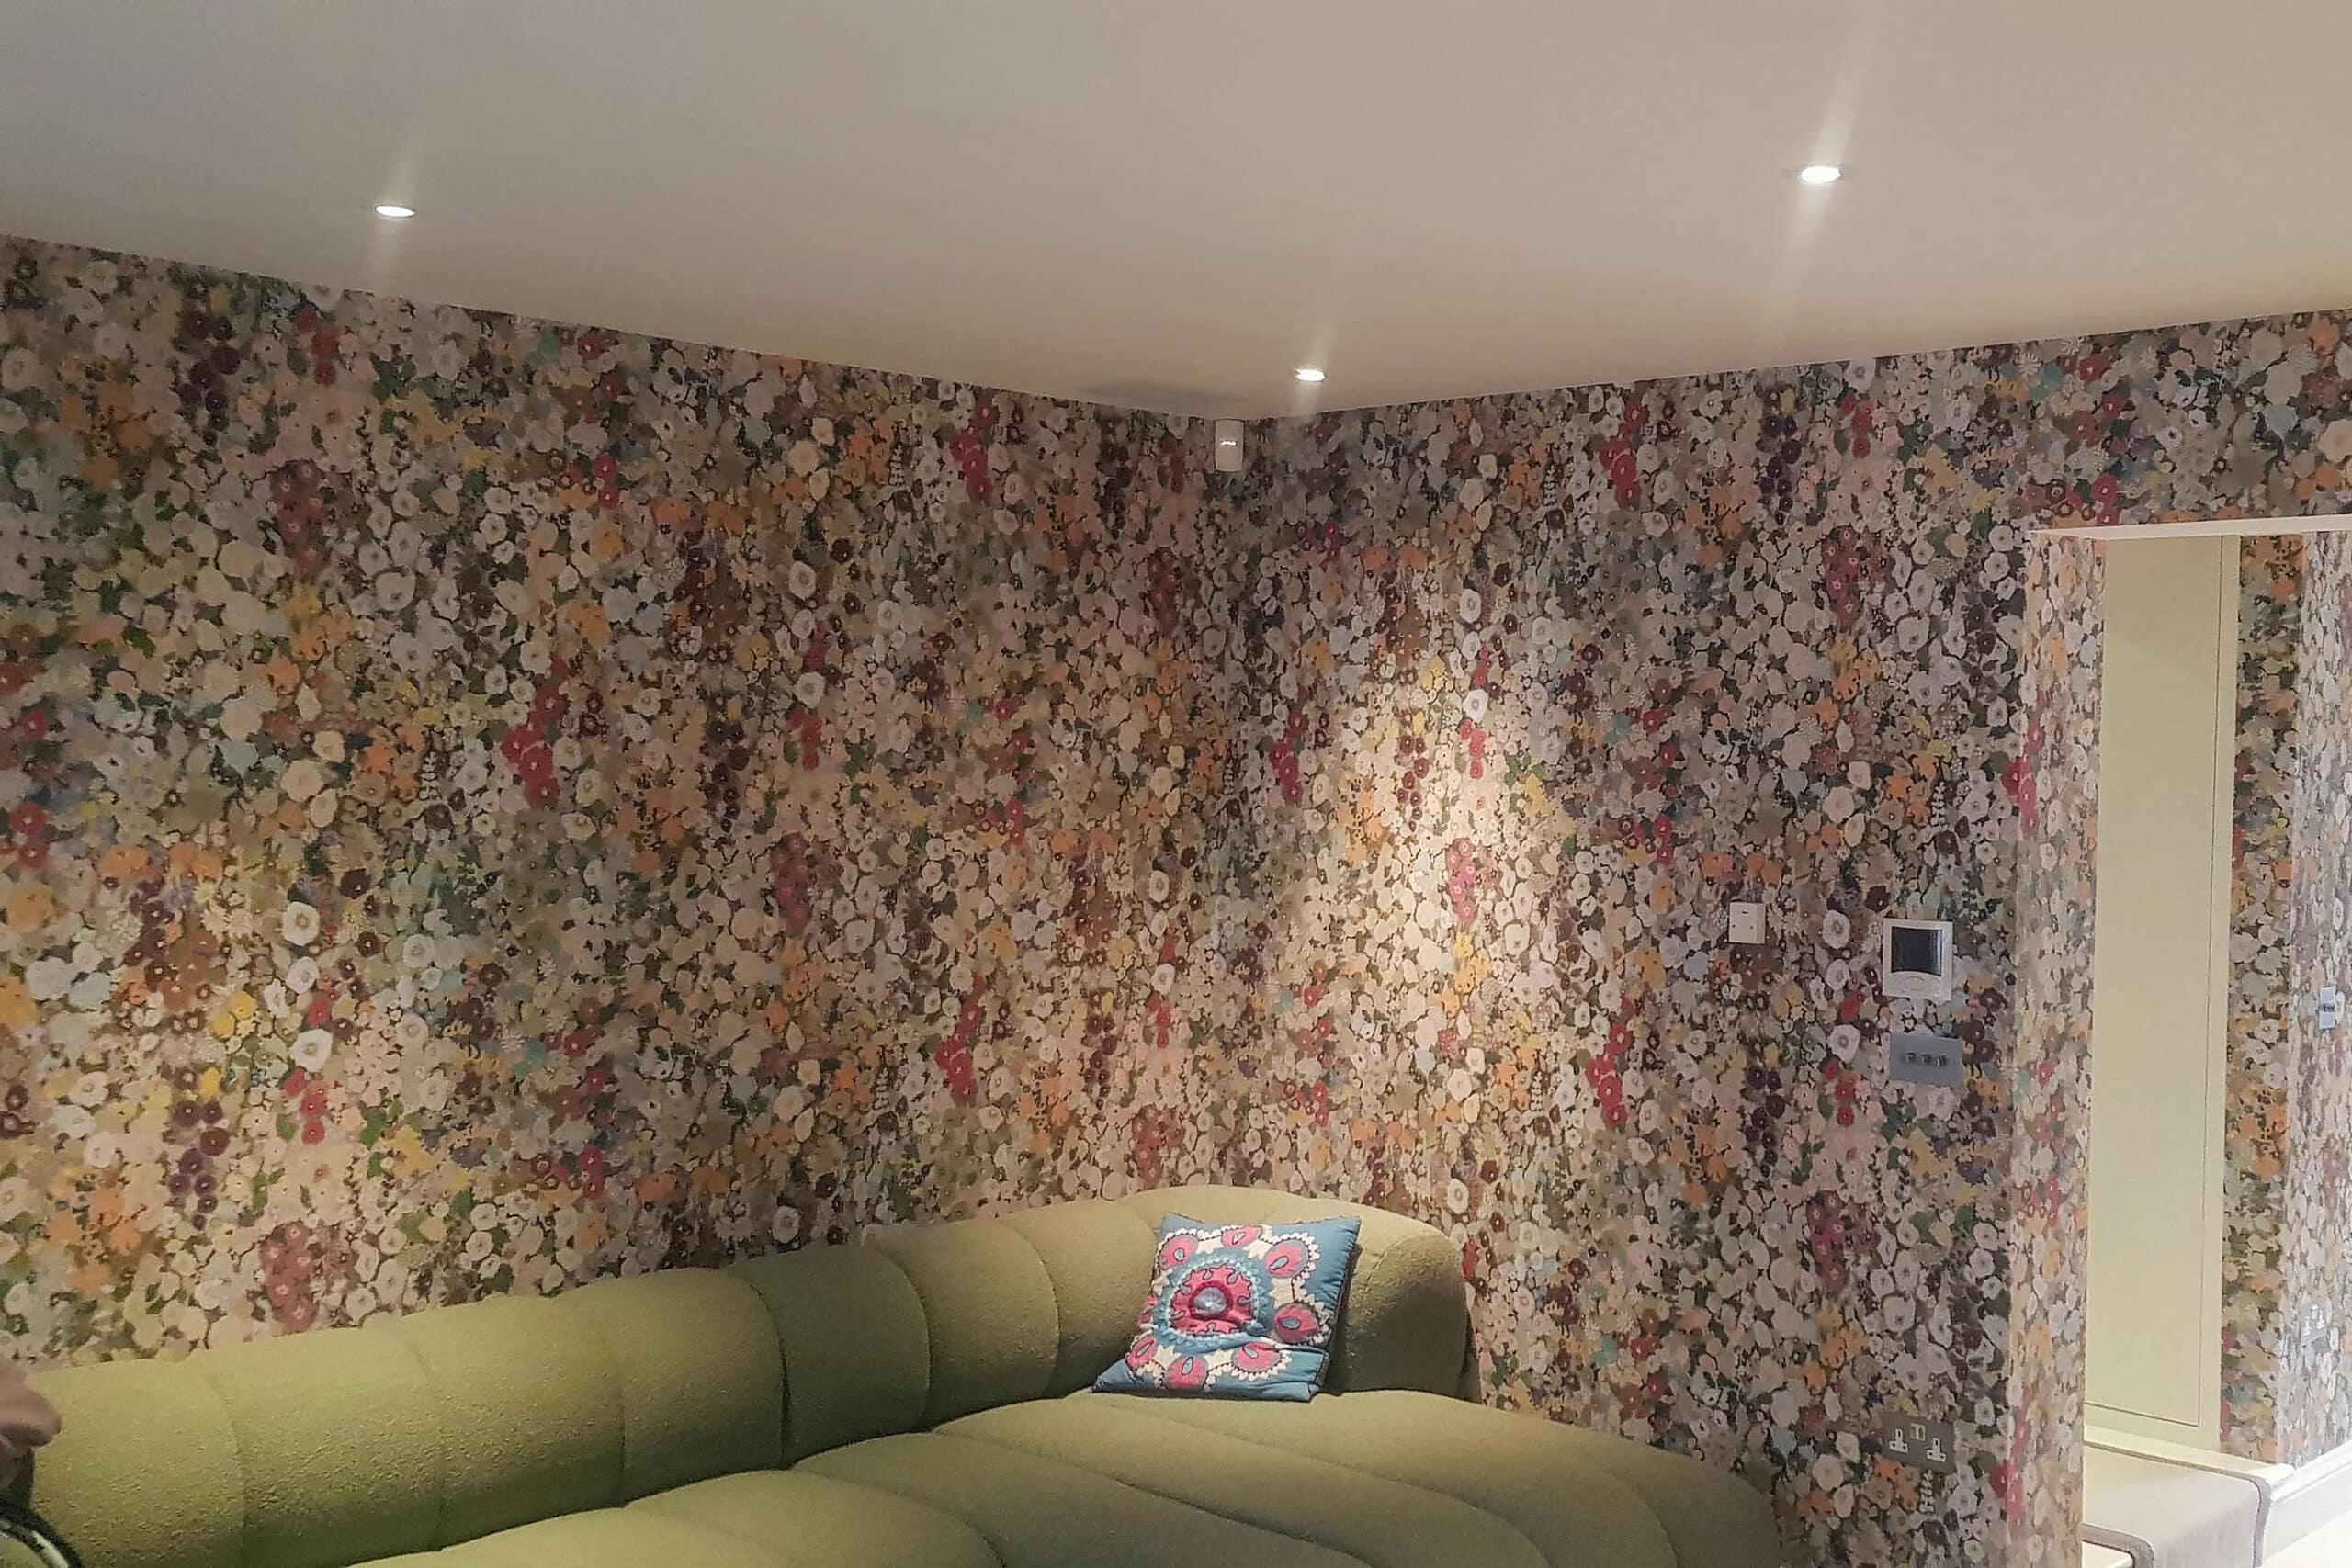 House of Hackney floral wallpaper installed in an open plan living room.